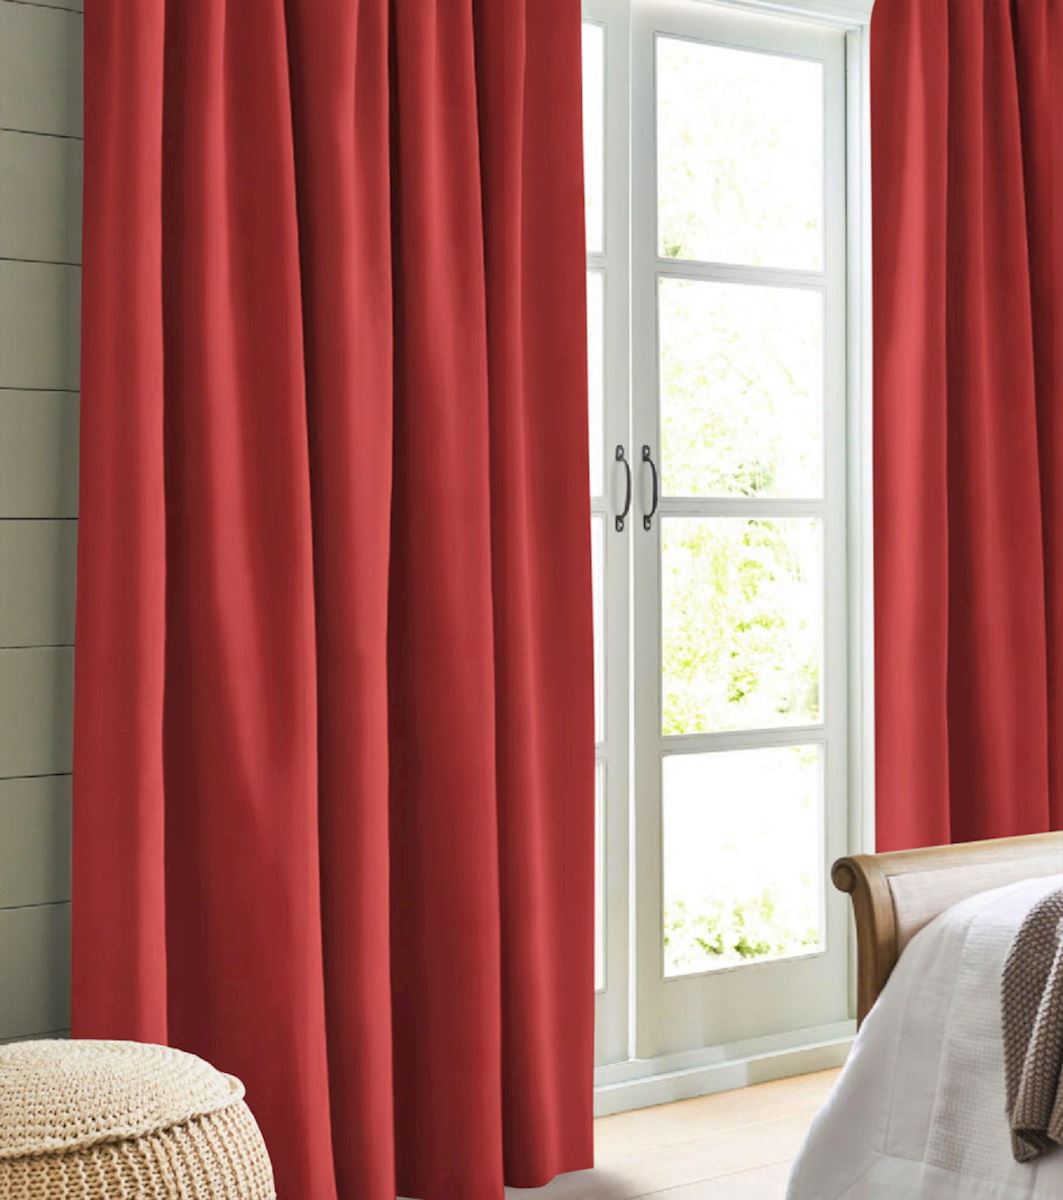 Blackout curtain rust red Cyrill